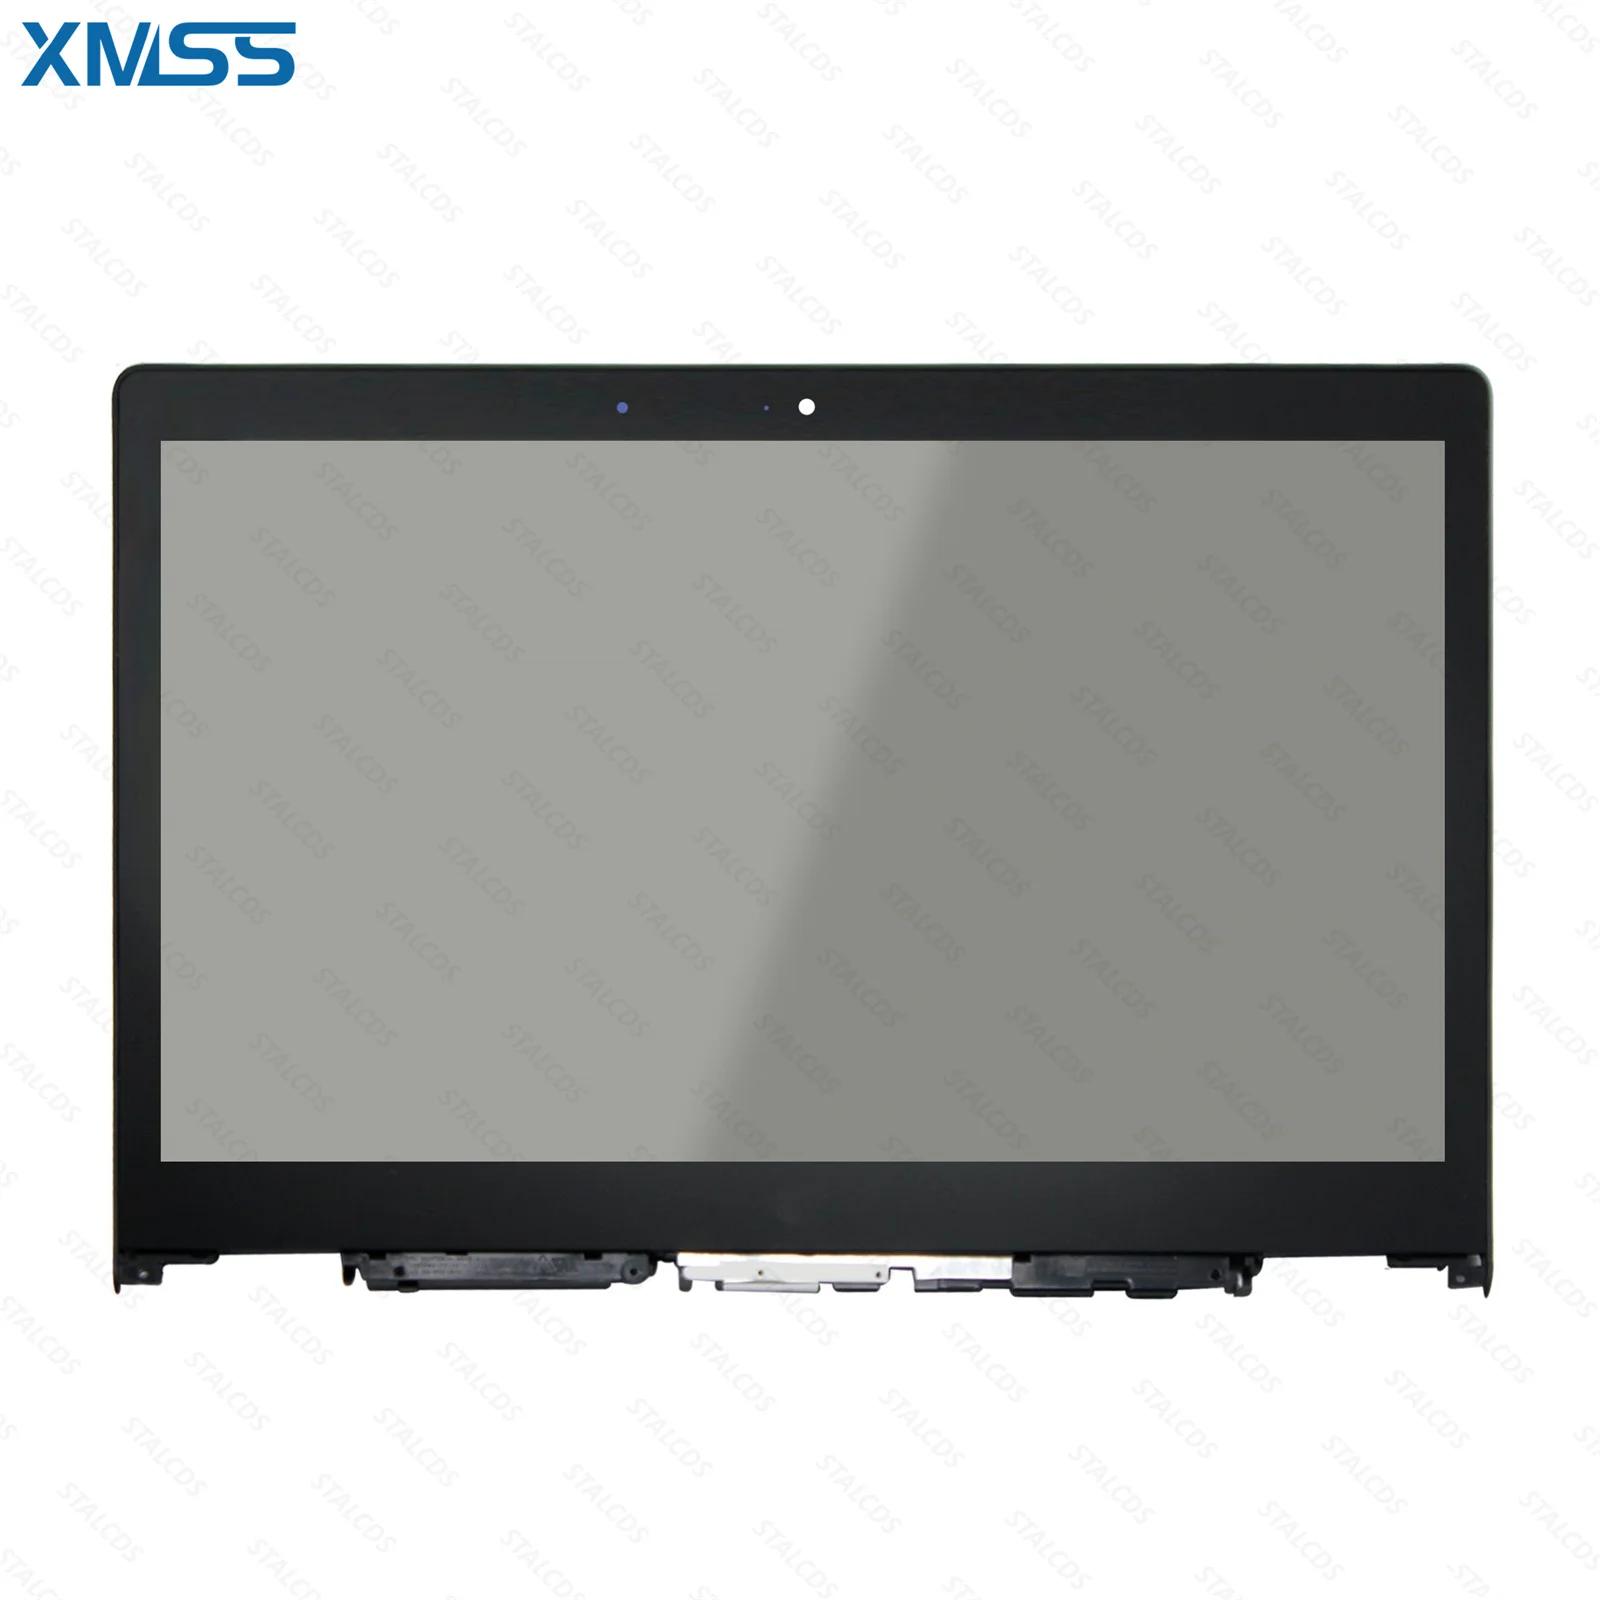 

14" FHD LCD Display Touchscreen Digitizer Assembly + Bezel for Lenovo Yoga 3 14 80JH